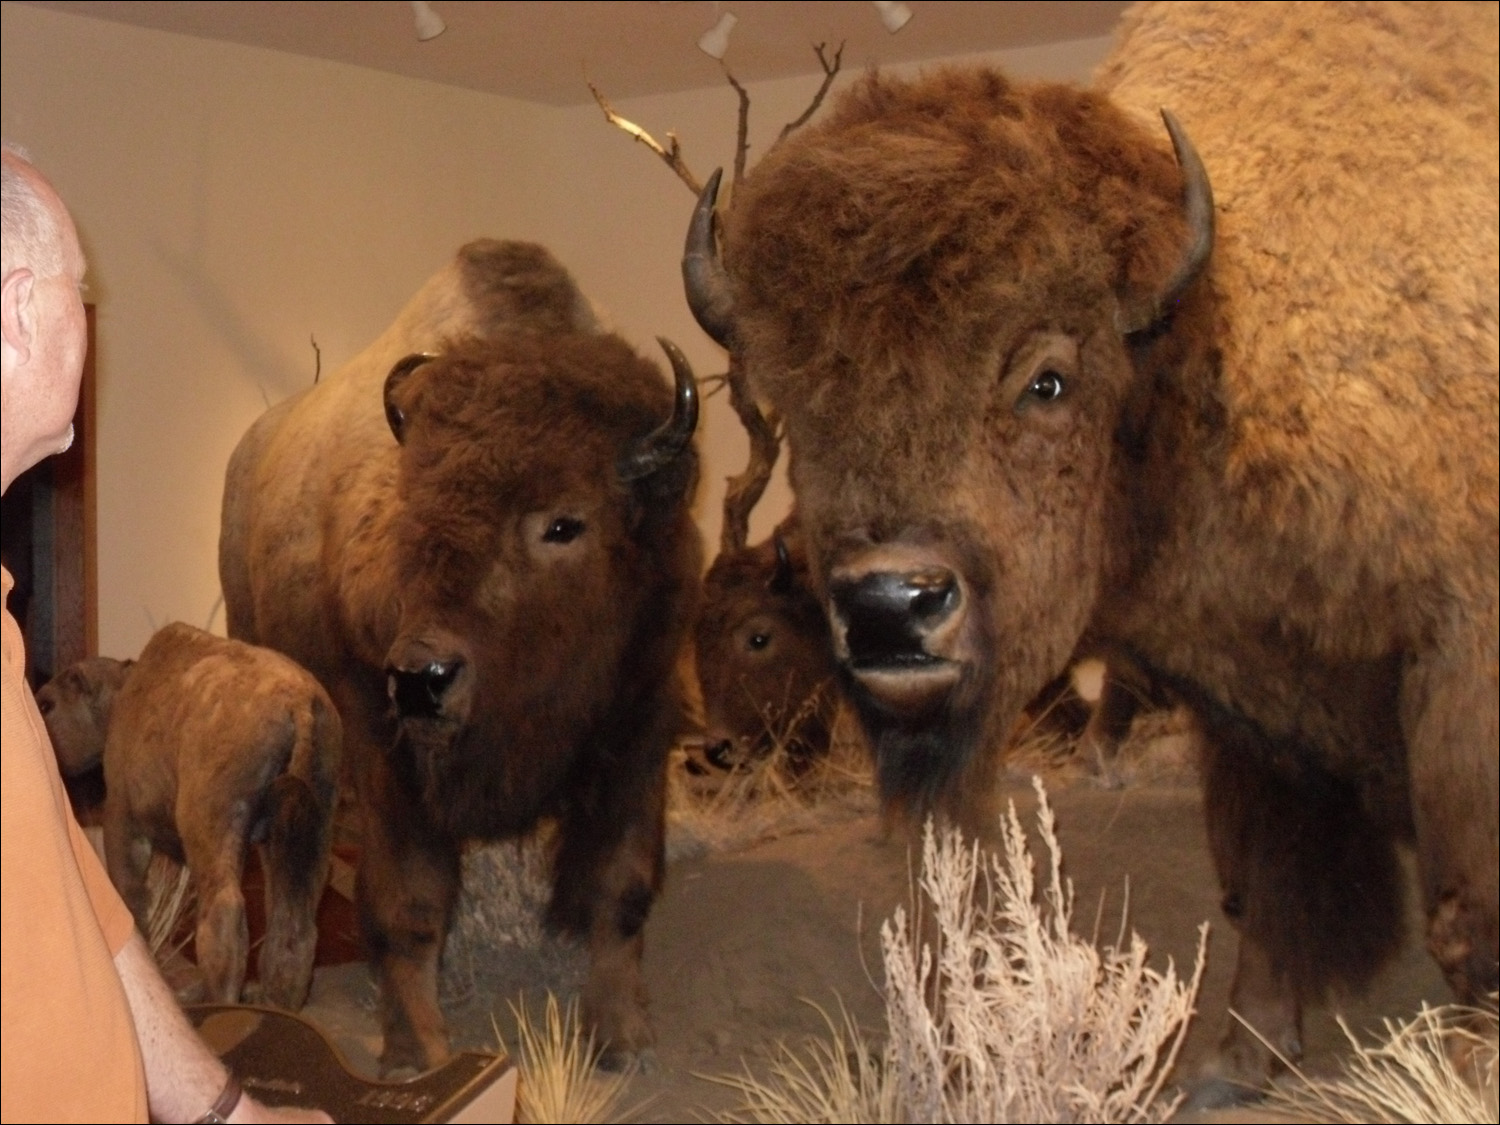 Fort Benton, MT Agriculture Museum-Bison family